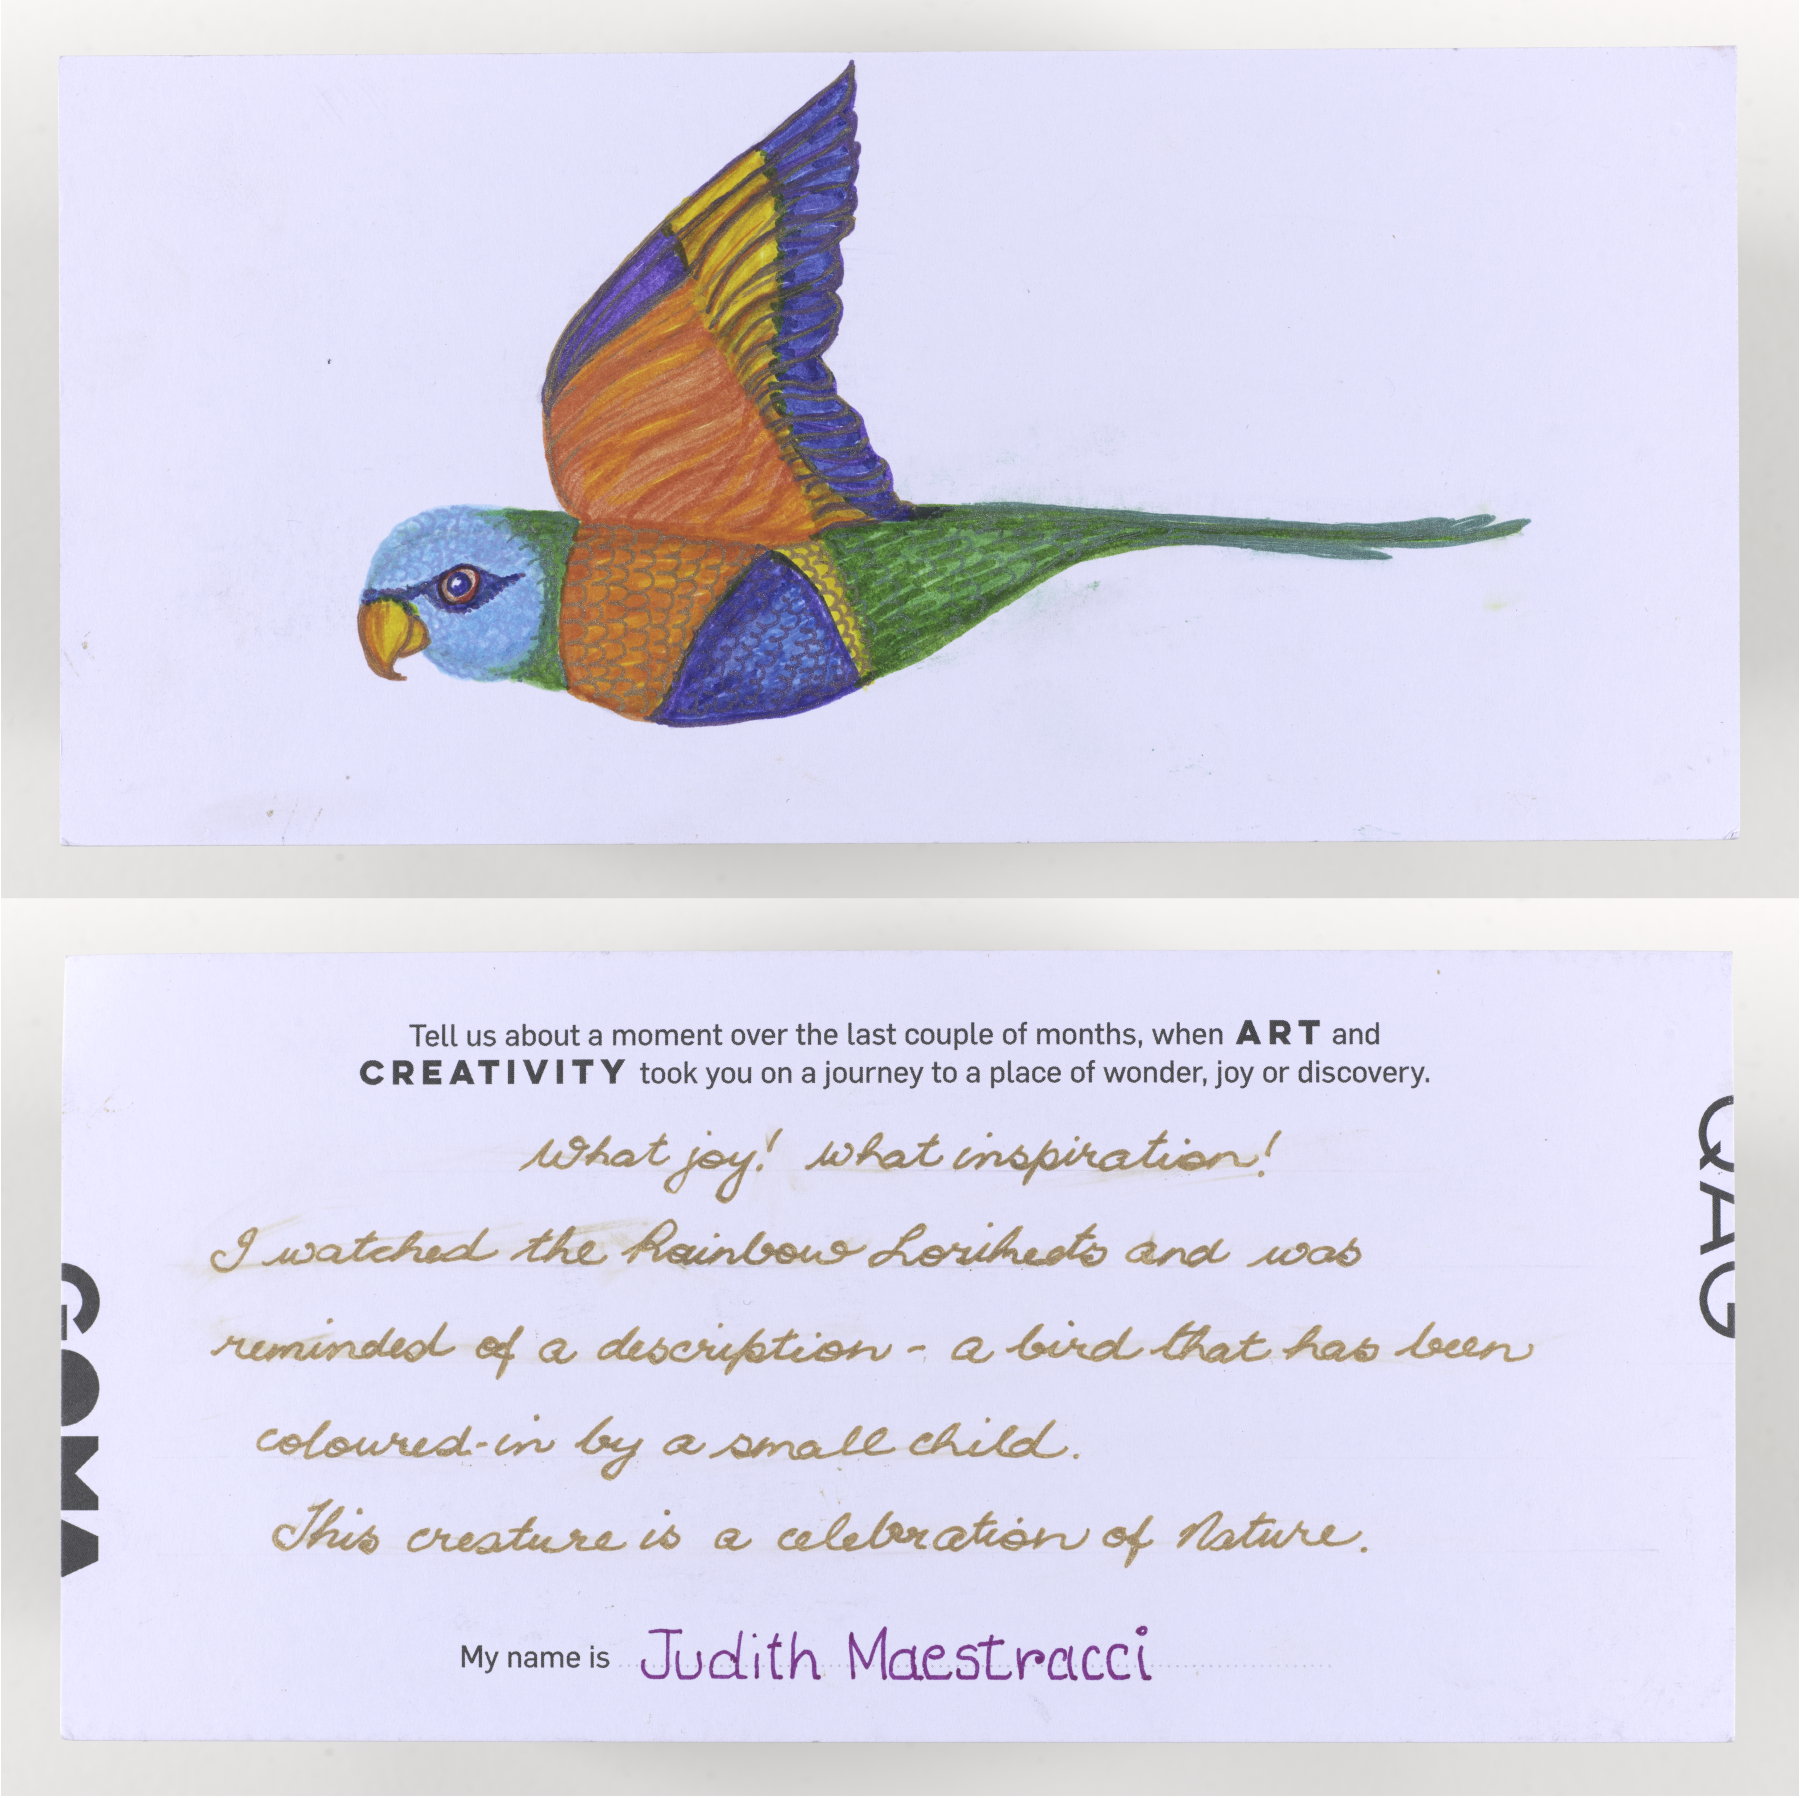 Generated image of the artwork: Judith Maestracci